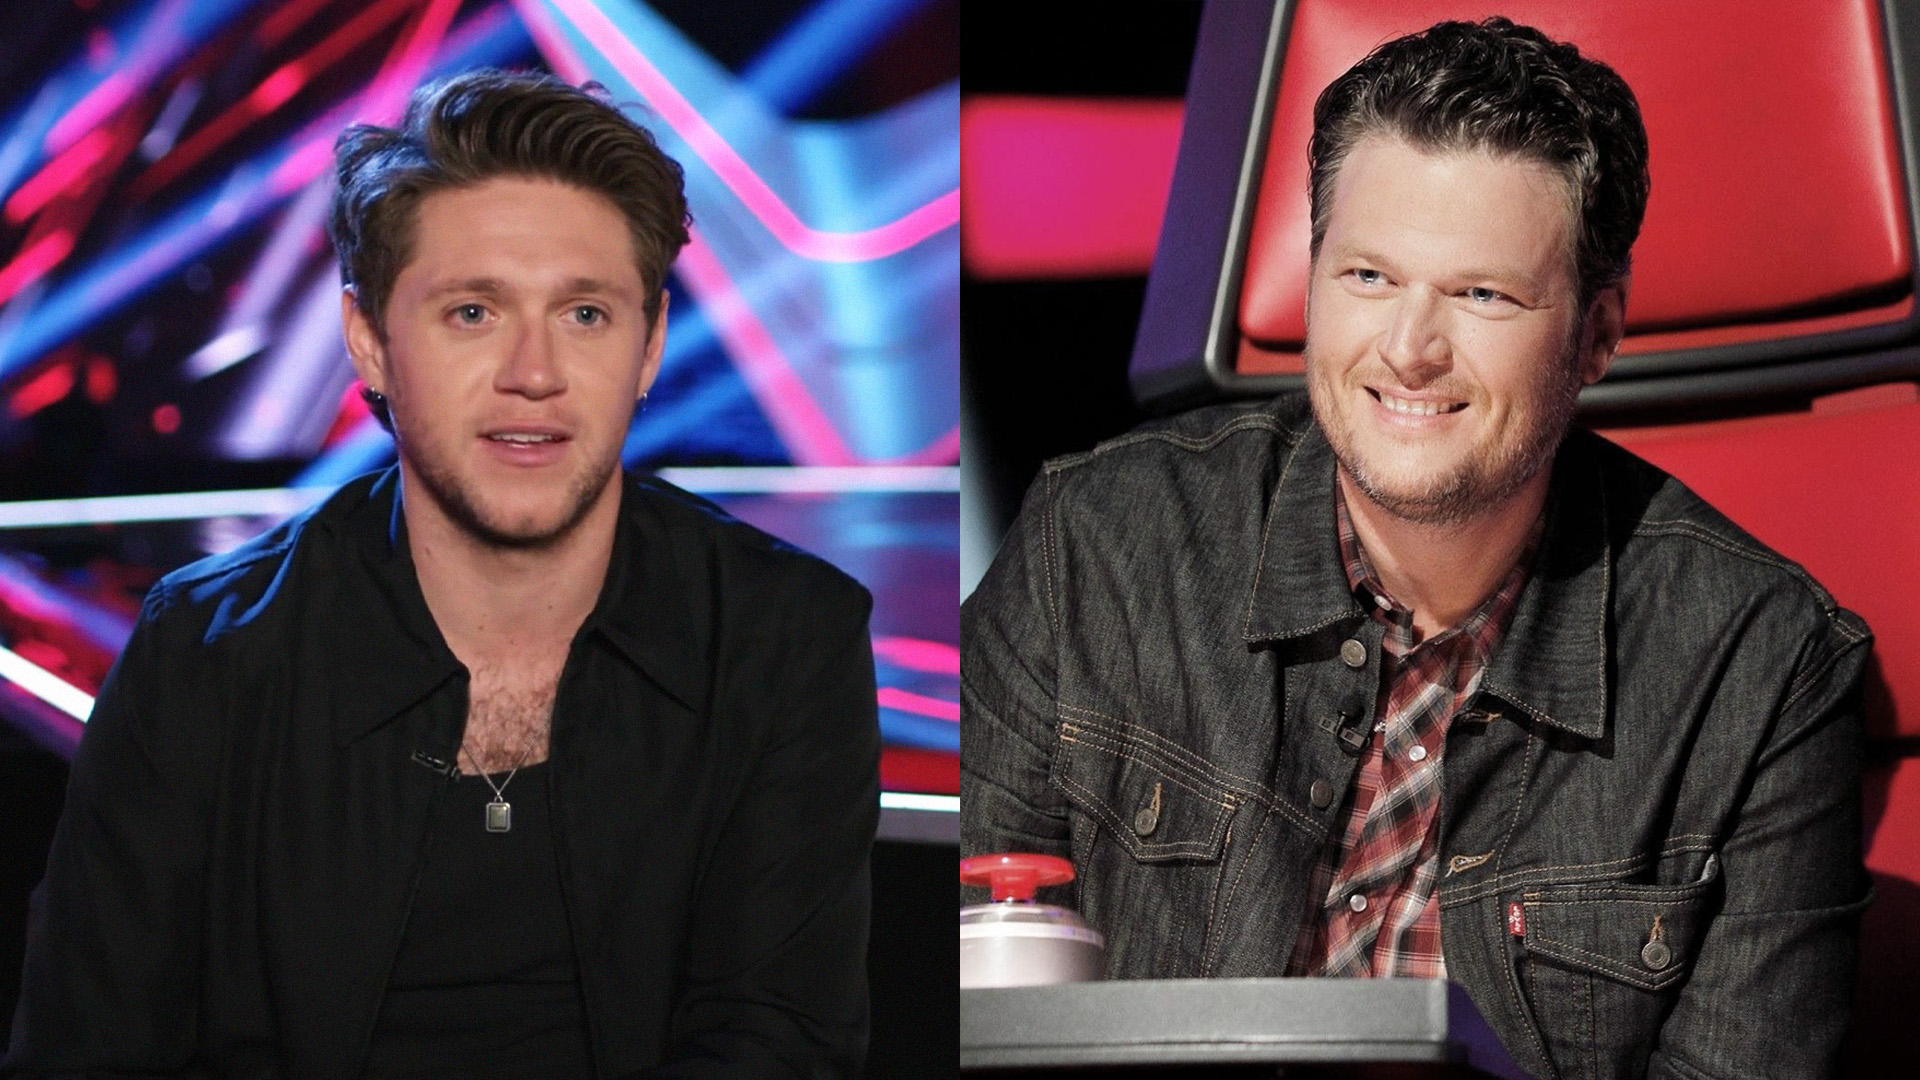 Blake Shelton's Reign as Country King on The Voice is Over Thanks to Niall Horan